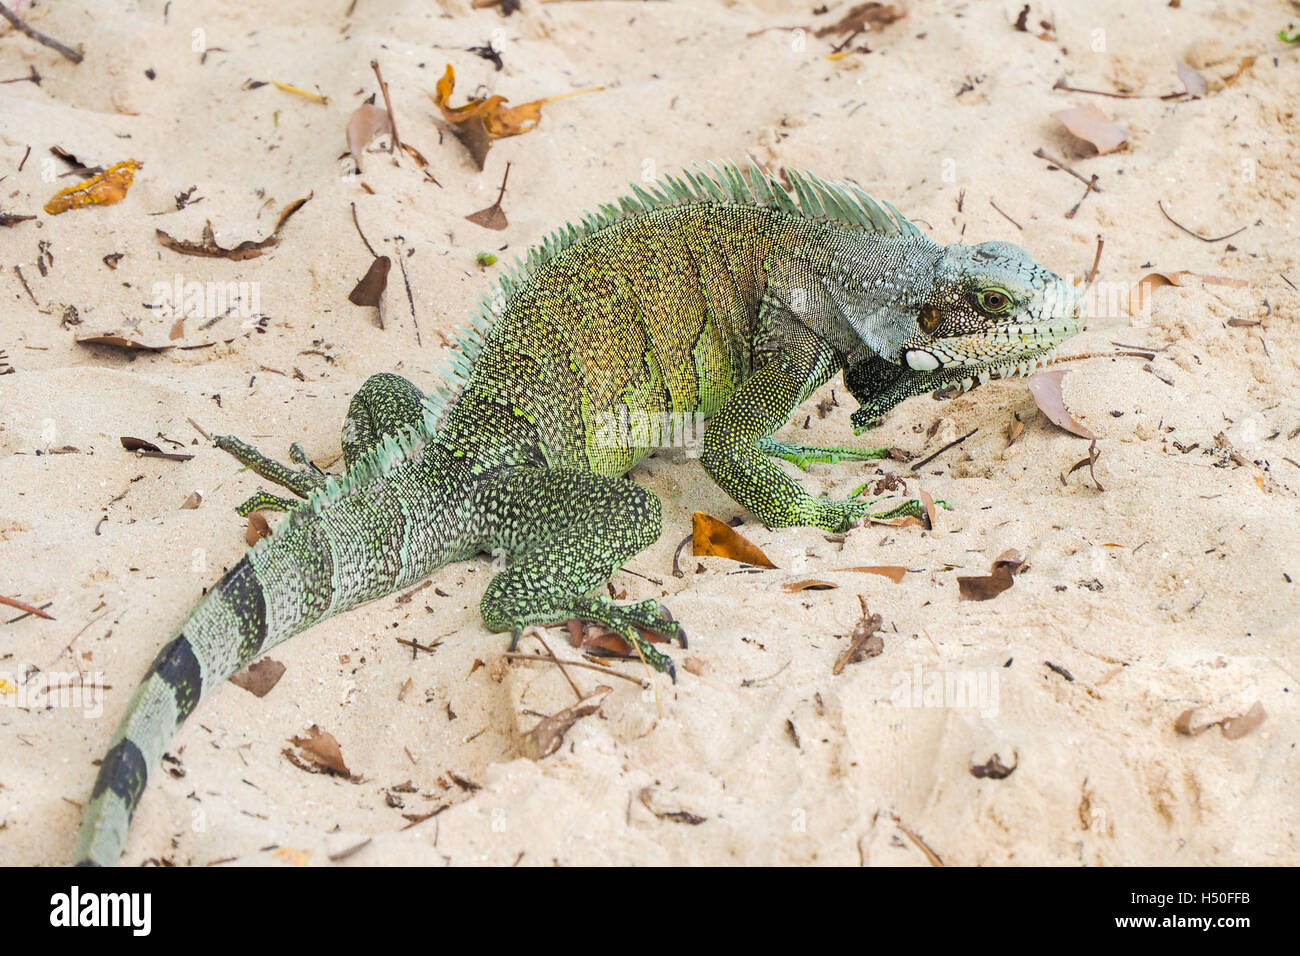 Big example of iguana on a sandy caribbean beach in Guadeloupe Stock Photo